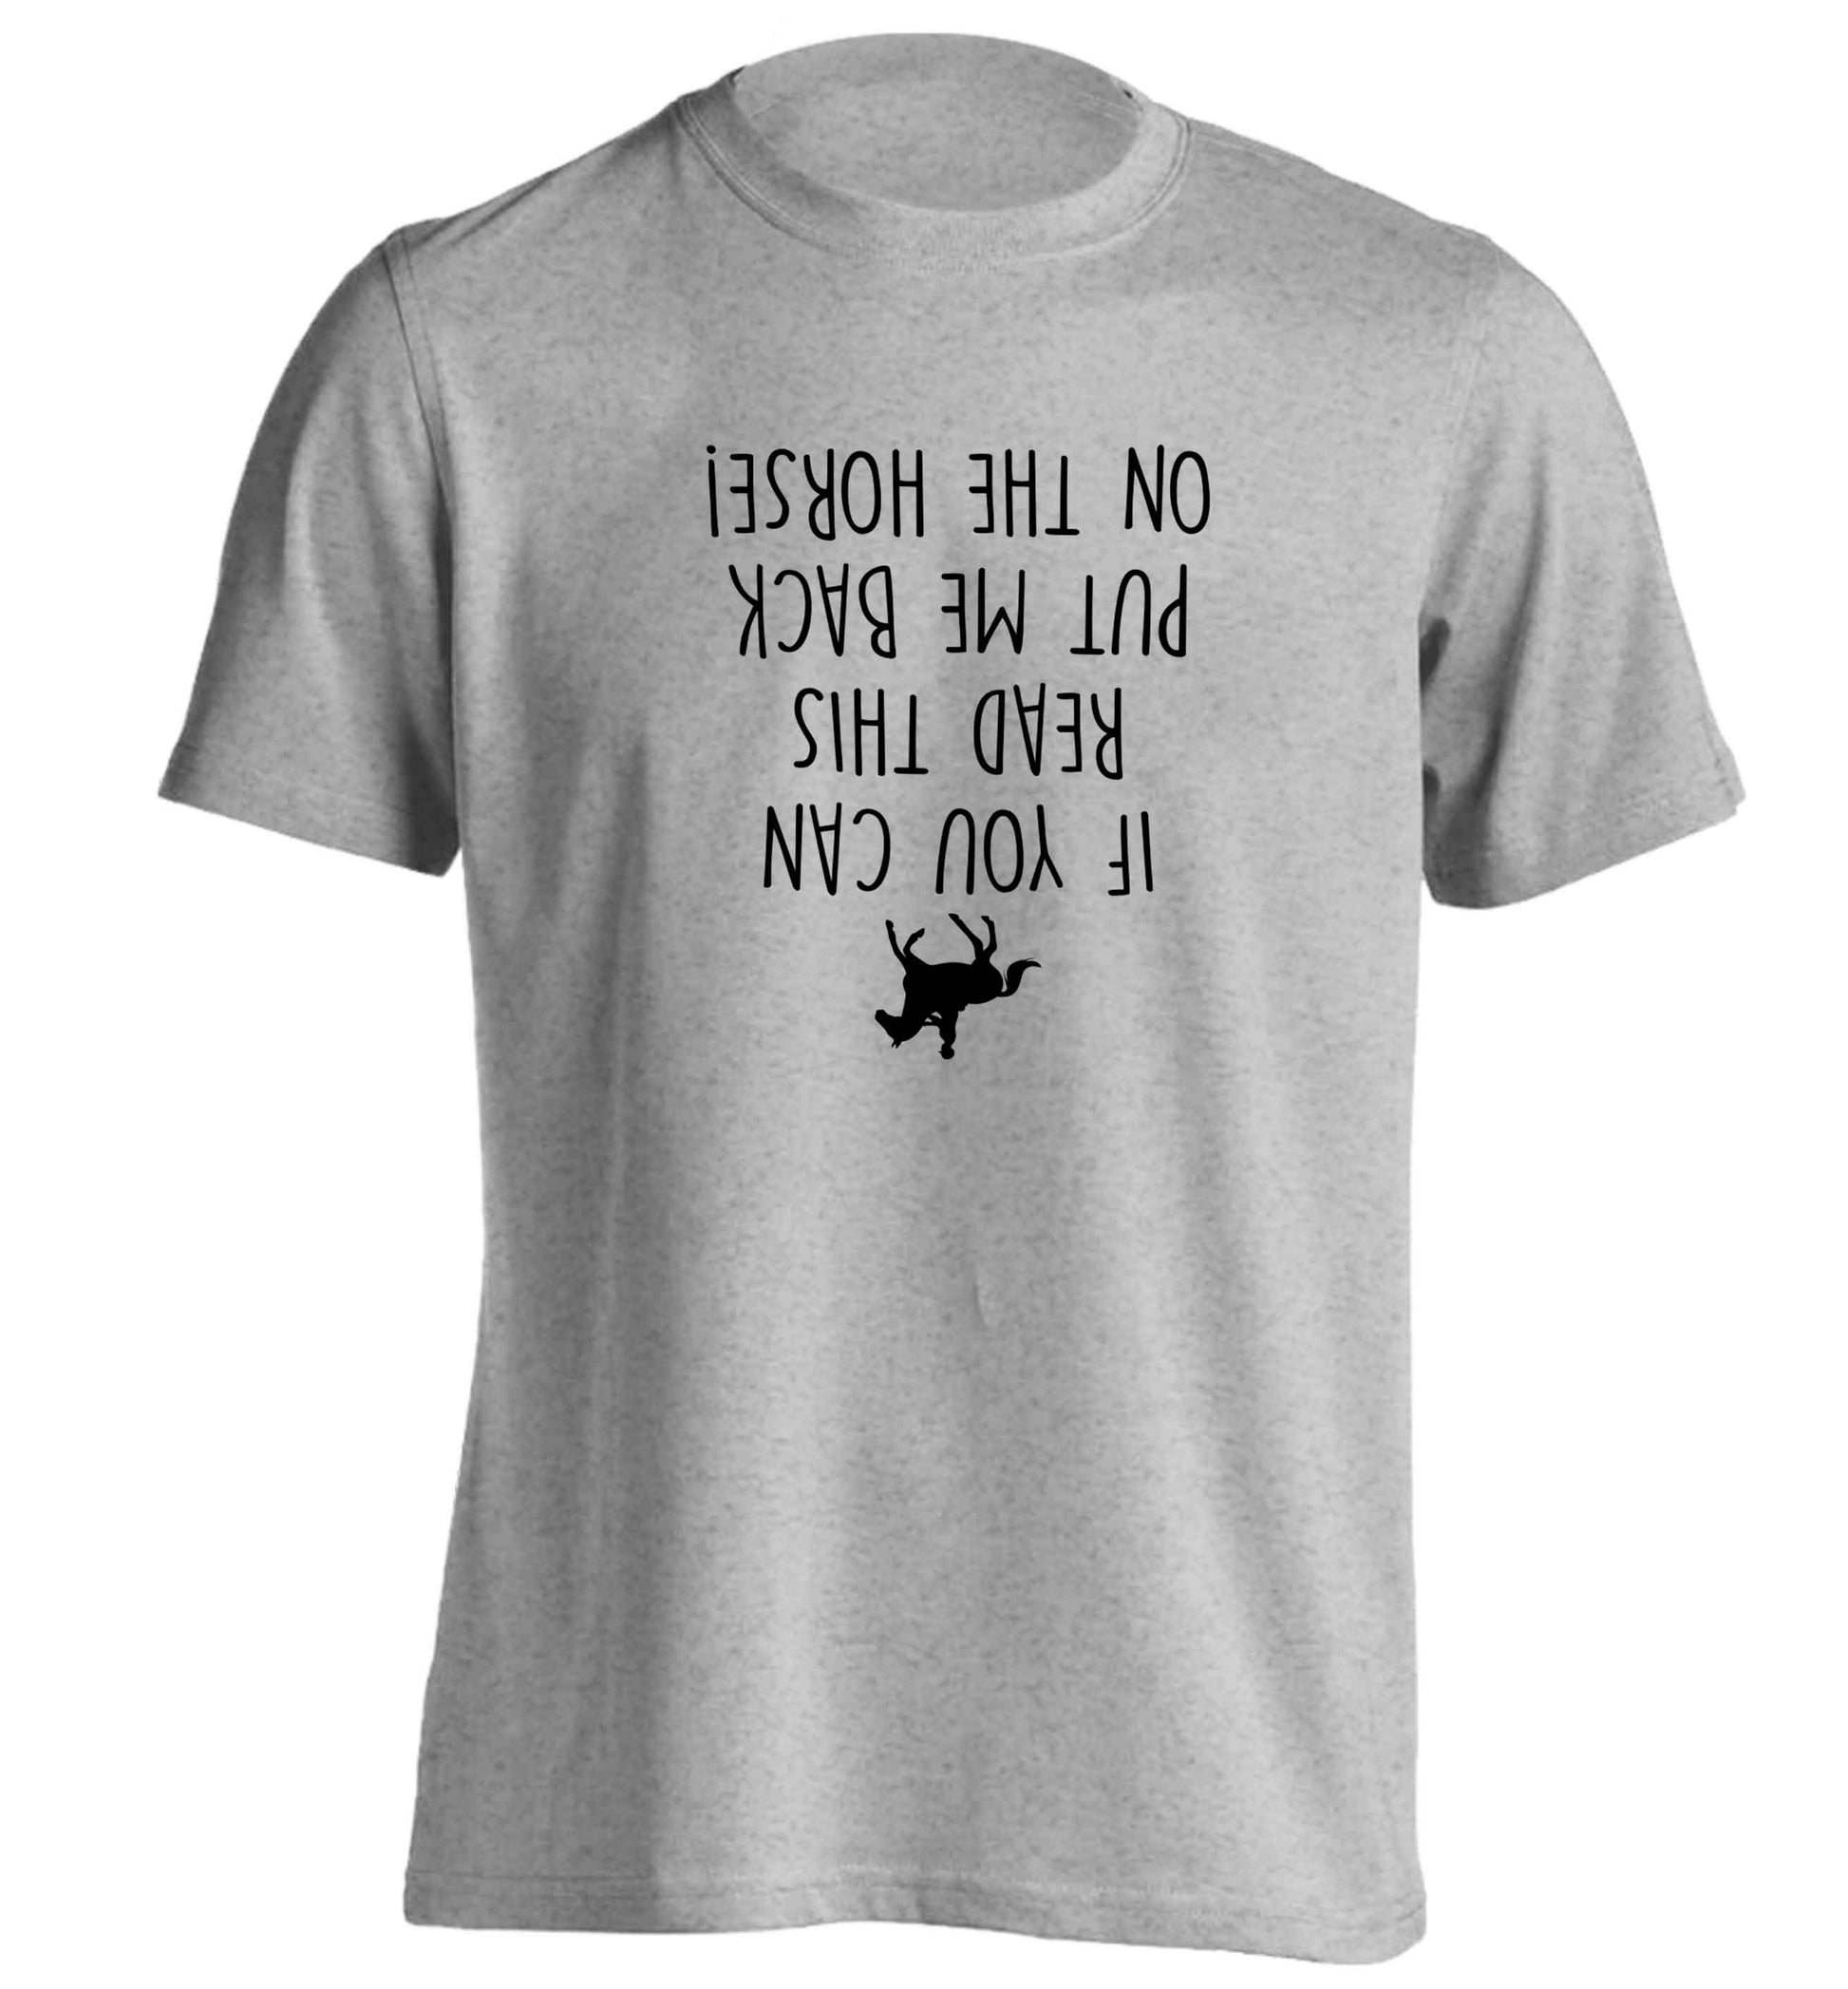 If you can read this put me back on the horse adults unisex grey Tshirt 2XL